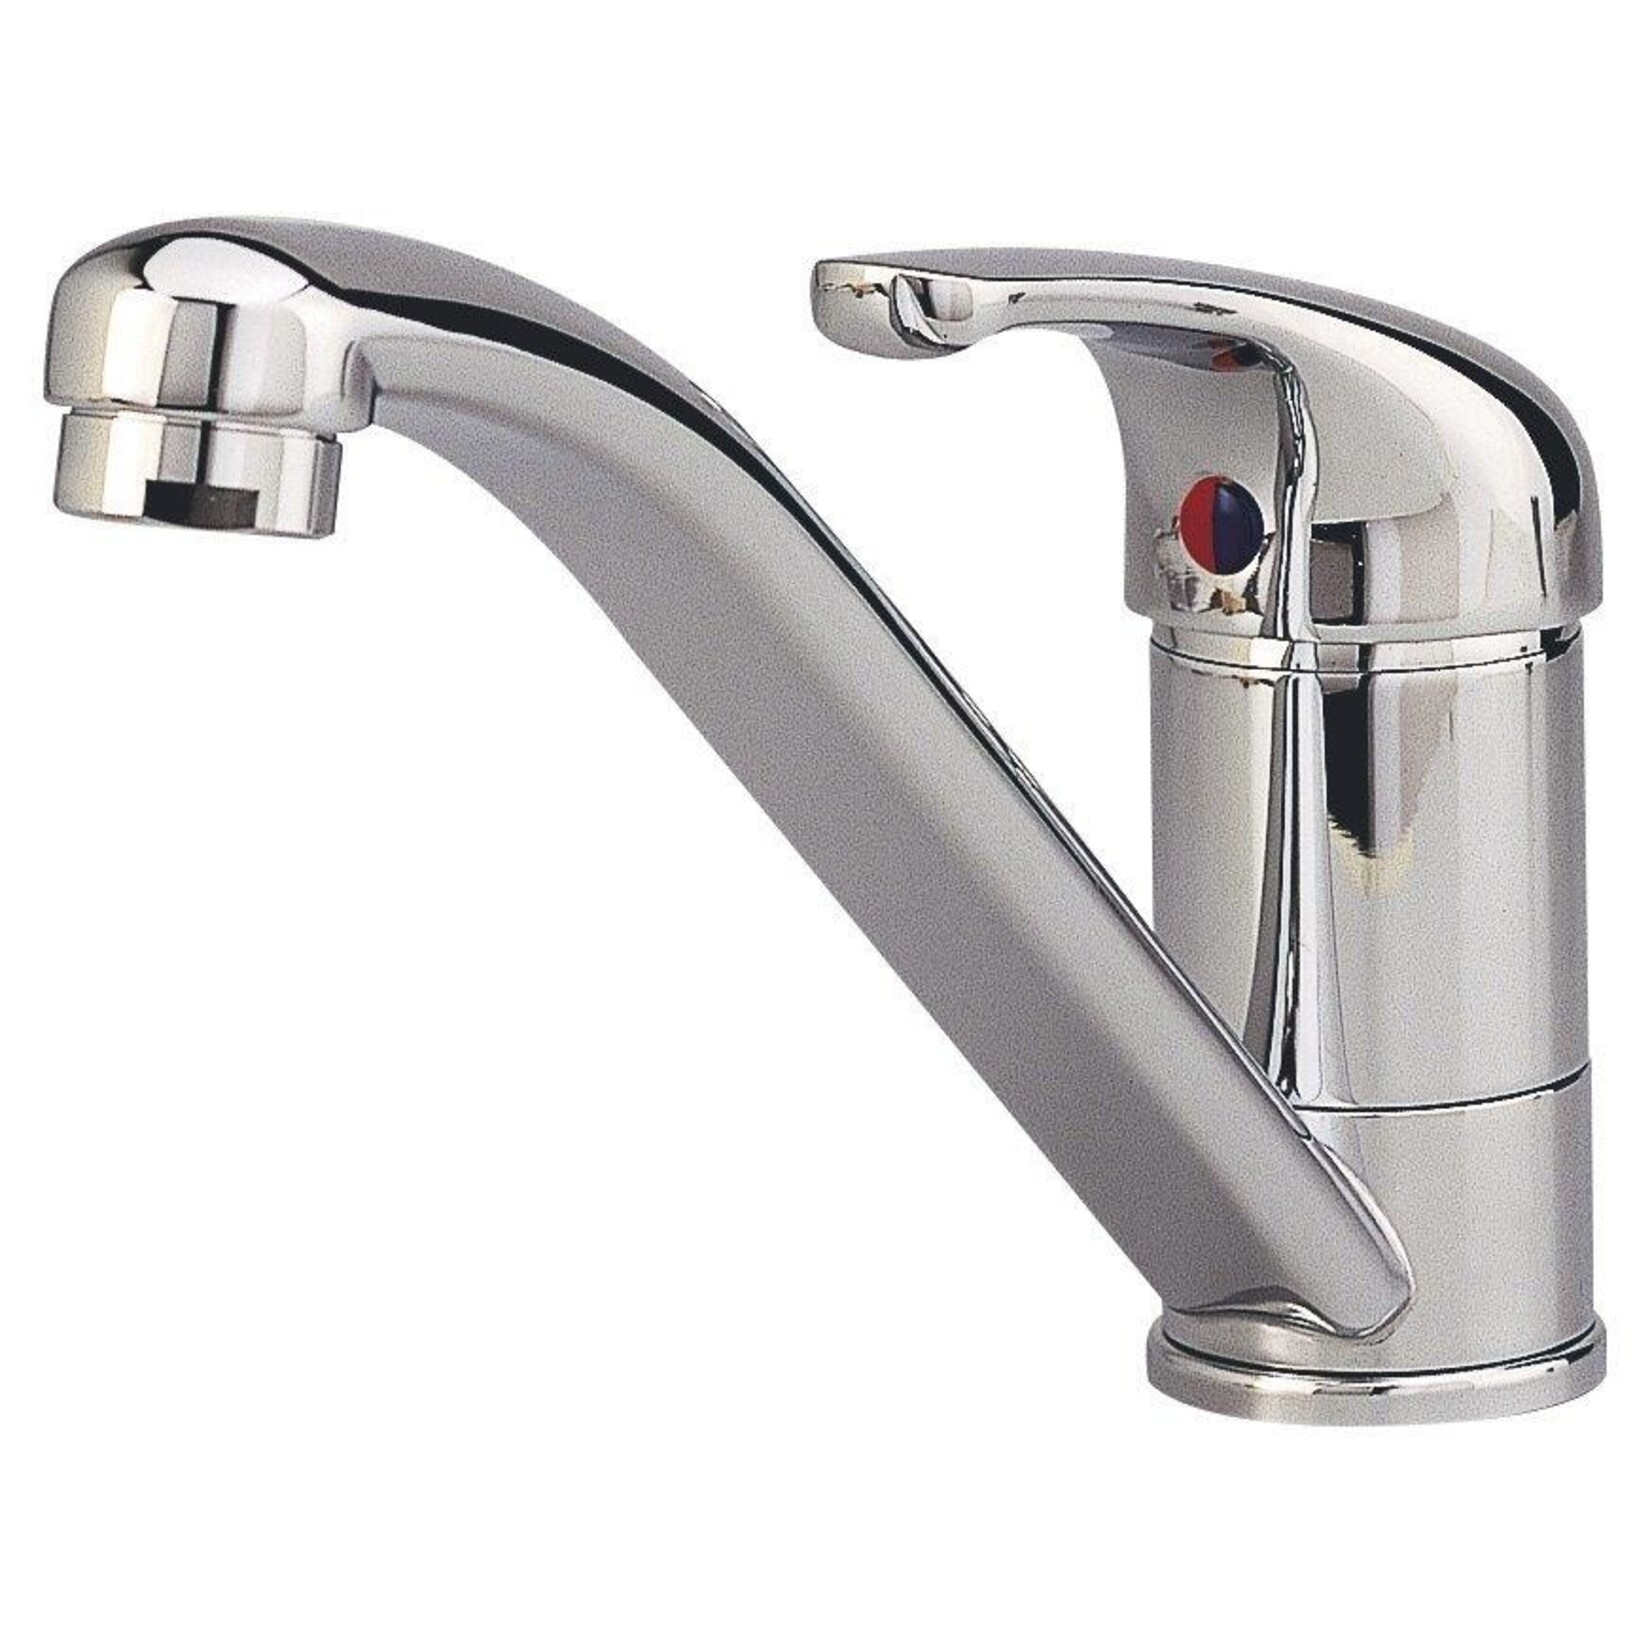 Plastimo Mixer tap with long spout